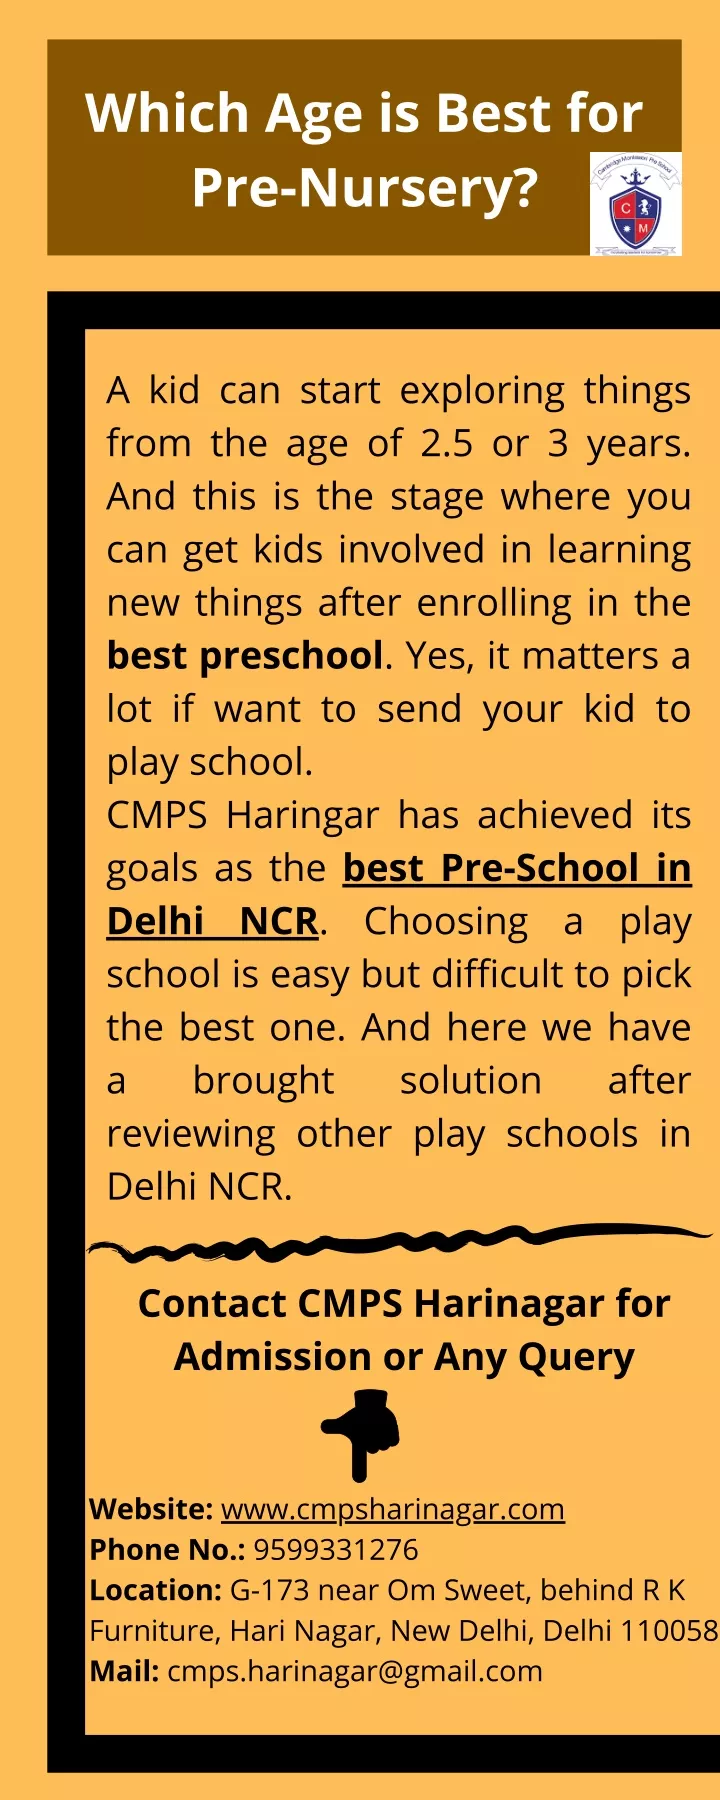 which age is best for pre nursery